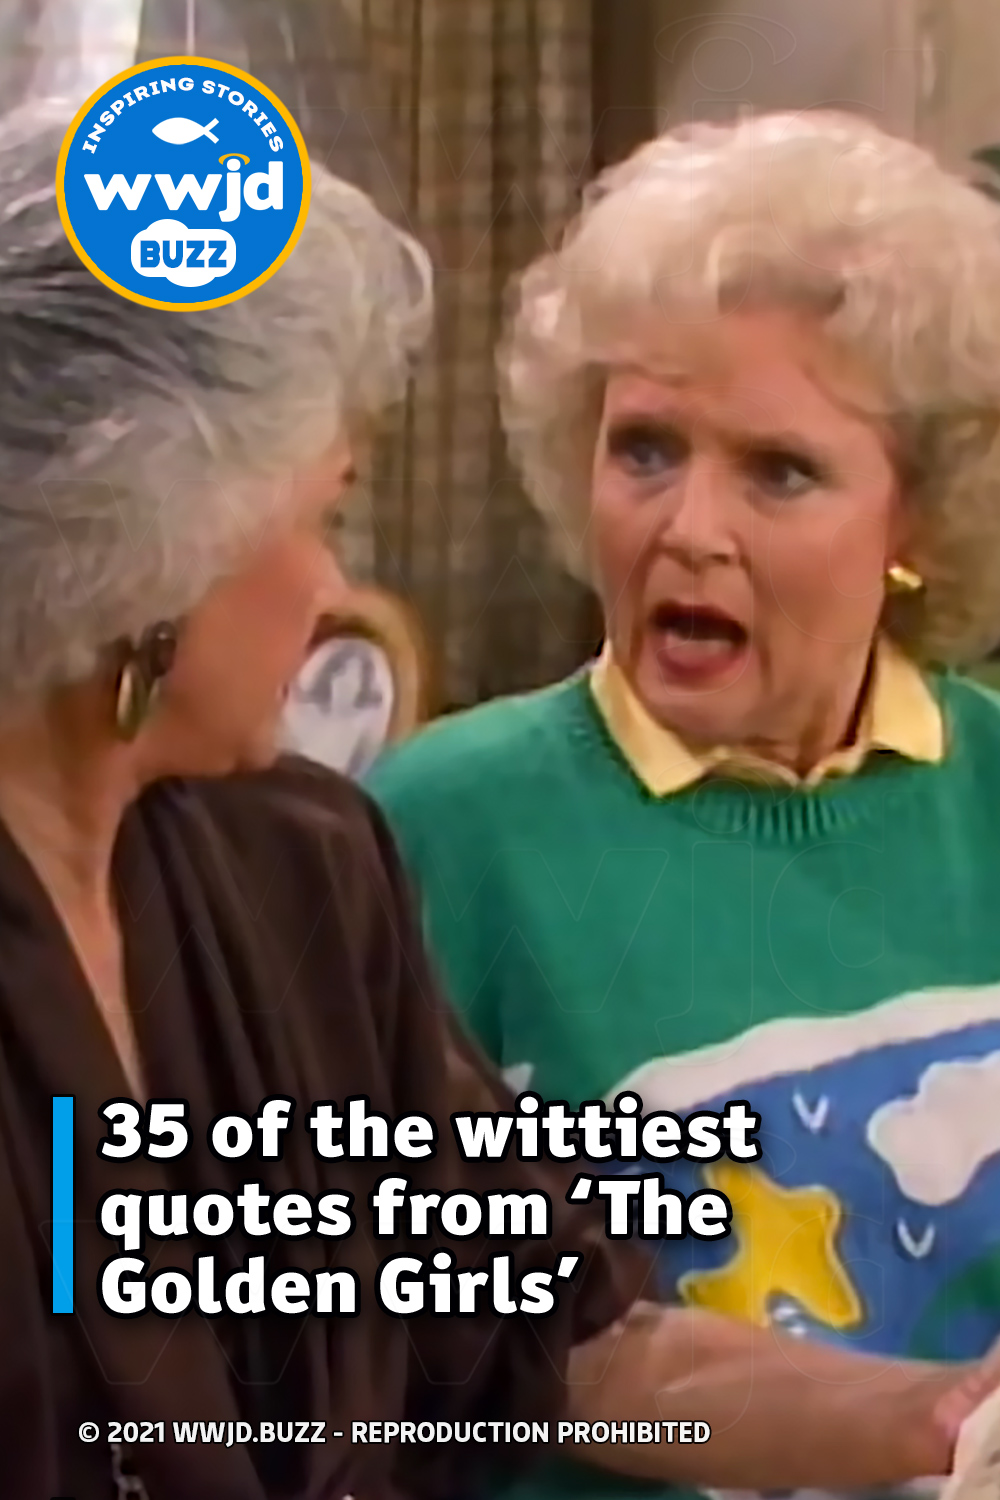 35 of the wittiest quotes from ‘The Golden Girls’